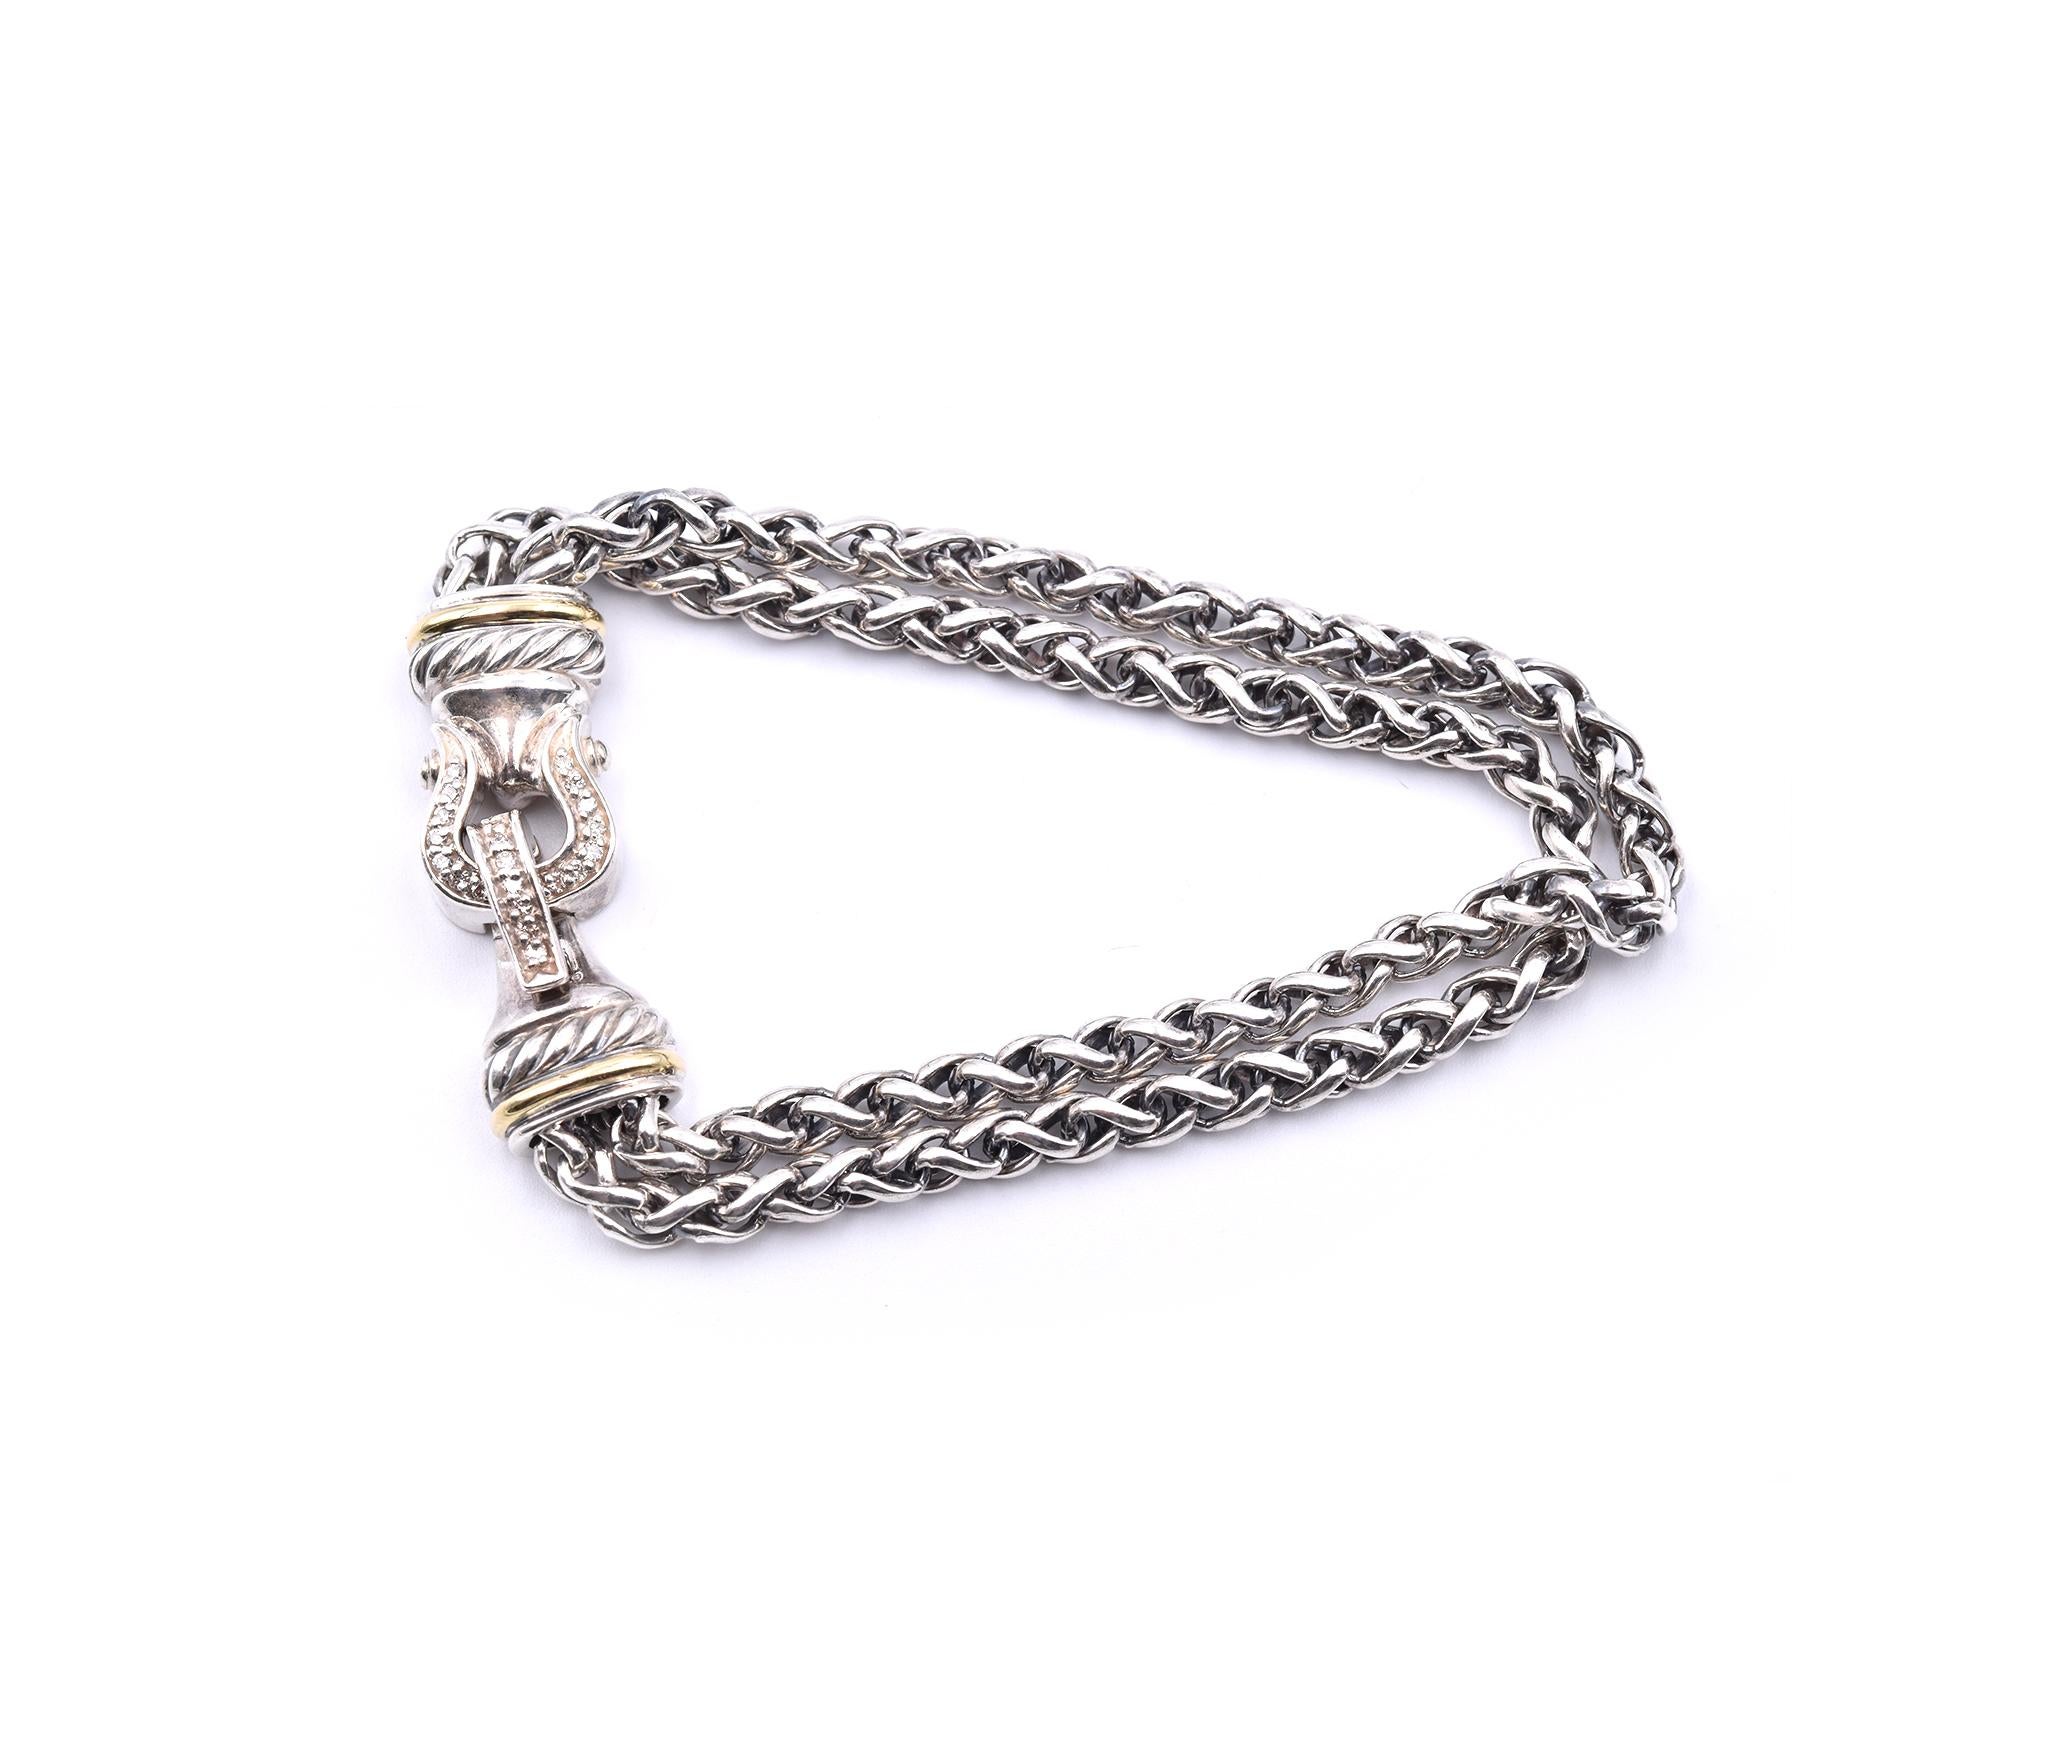 Designer: David Yurman
Material: Sterling Silver & 18K yellow gold
Diamonds: 23 round brilliant cut = .25cttw
Color: G
Clarity: VS
Length: 7.5-inches
Weight: 11.77 grams